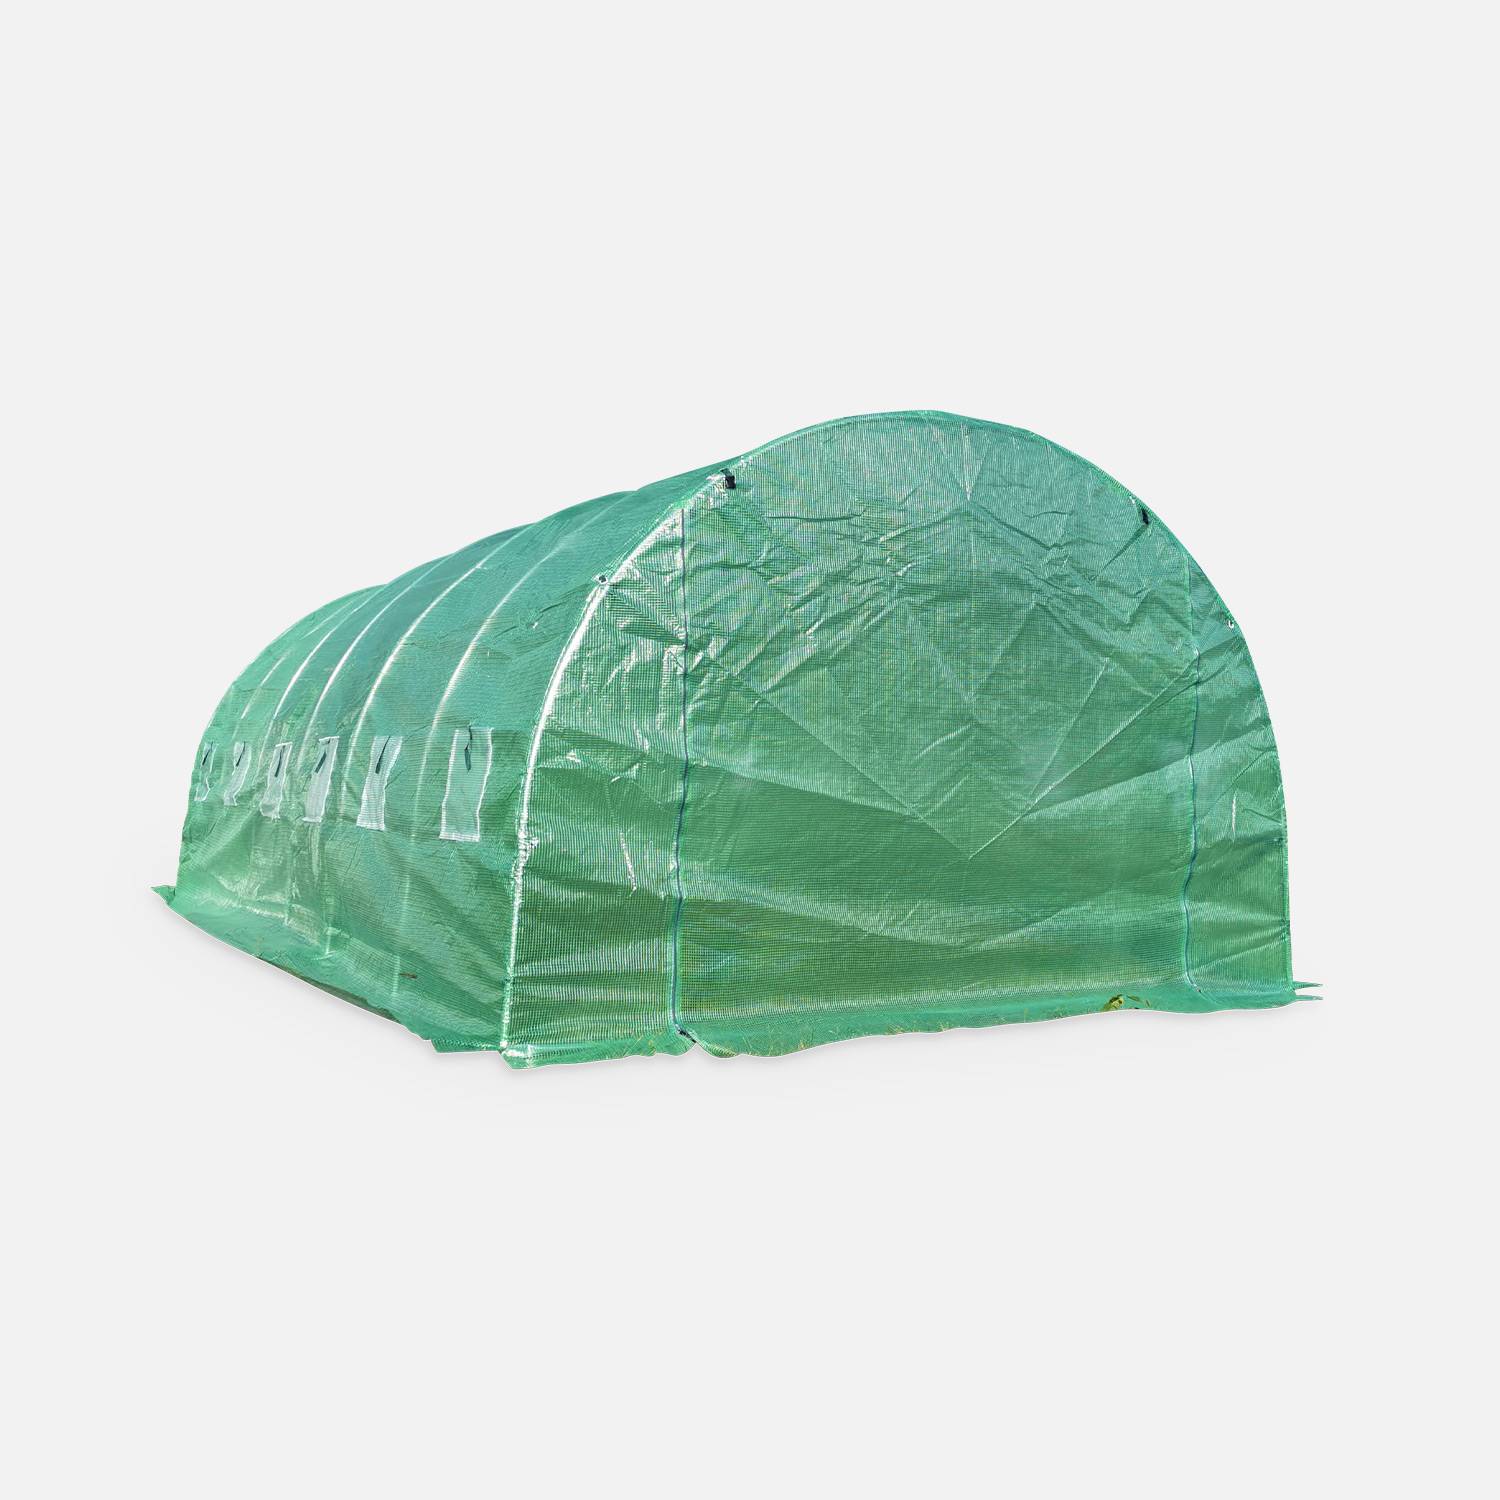 Replacement greenhouse cover - 18 sq metres - Romarin - Green  Photo2